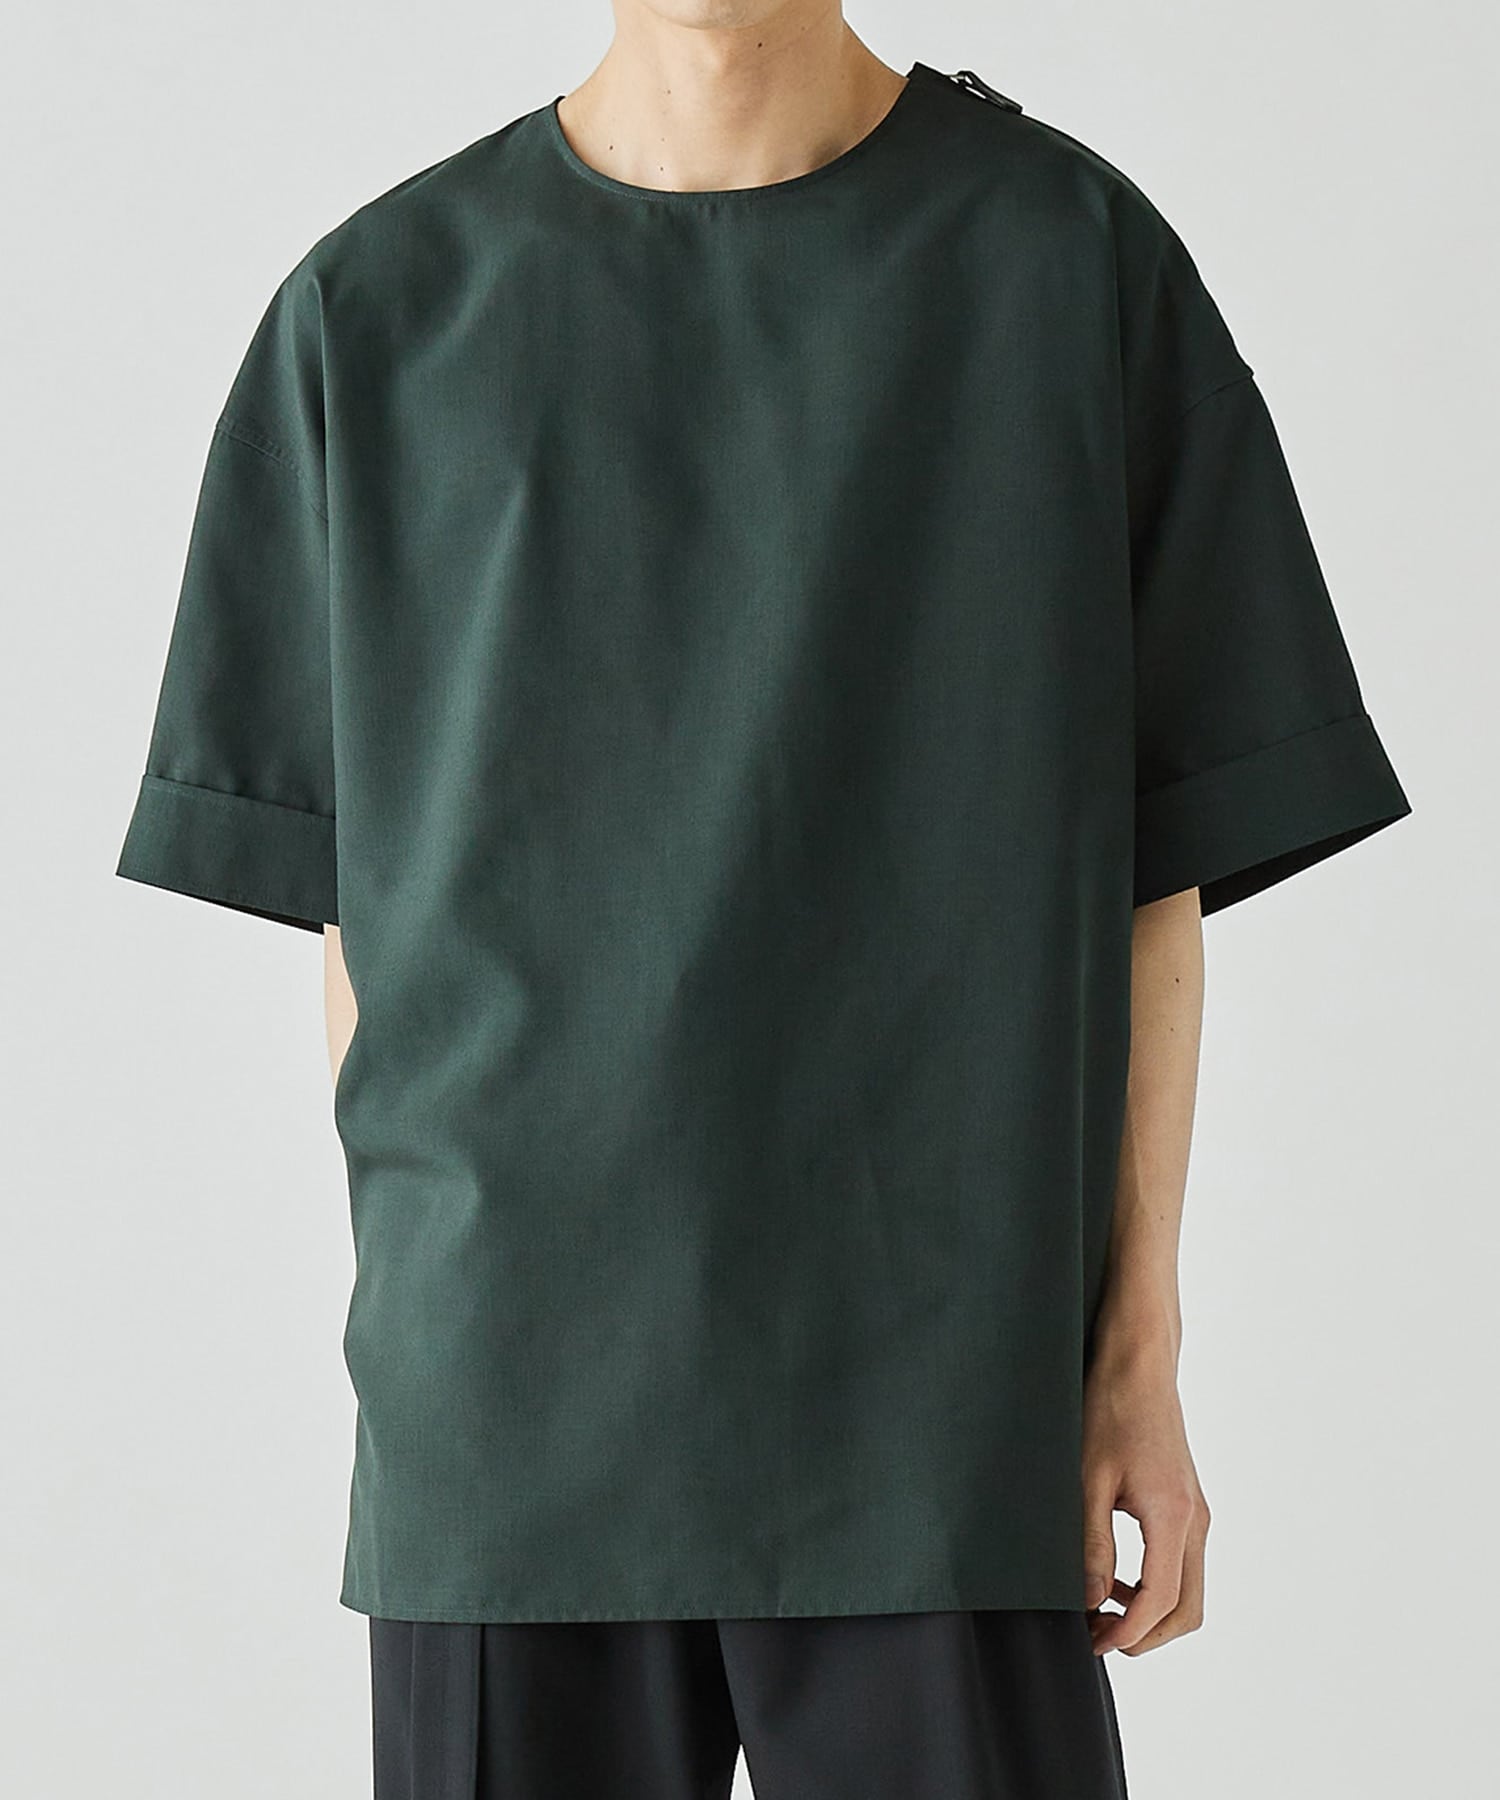 THE SIDE ZIP PULLOVER SHIRT SHORT SLEEVE